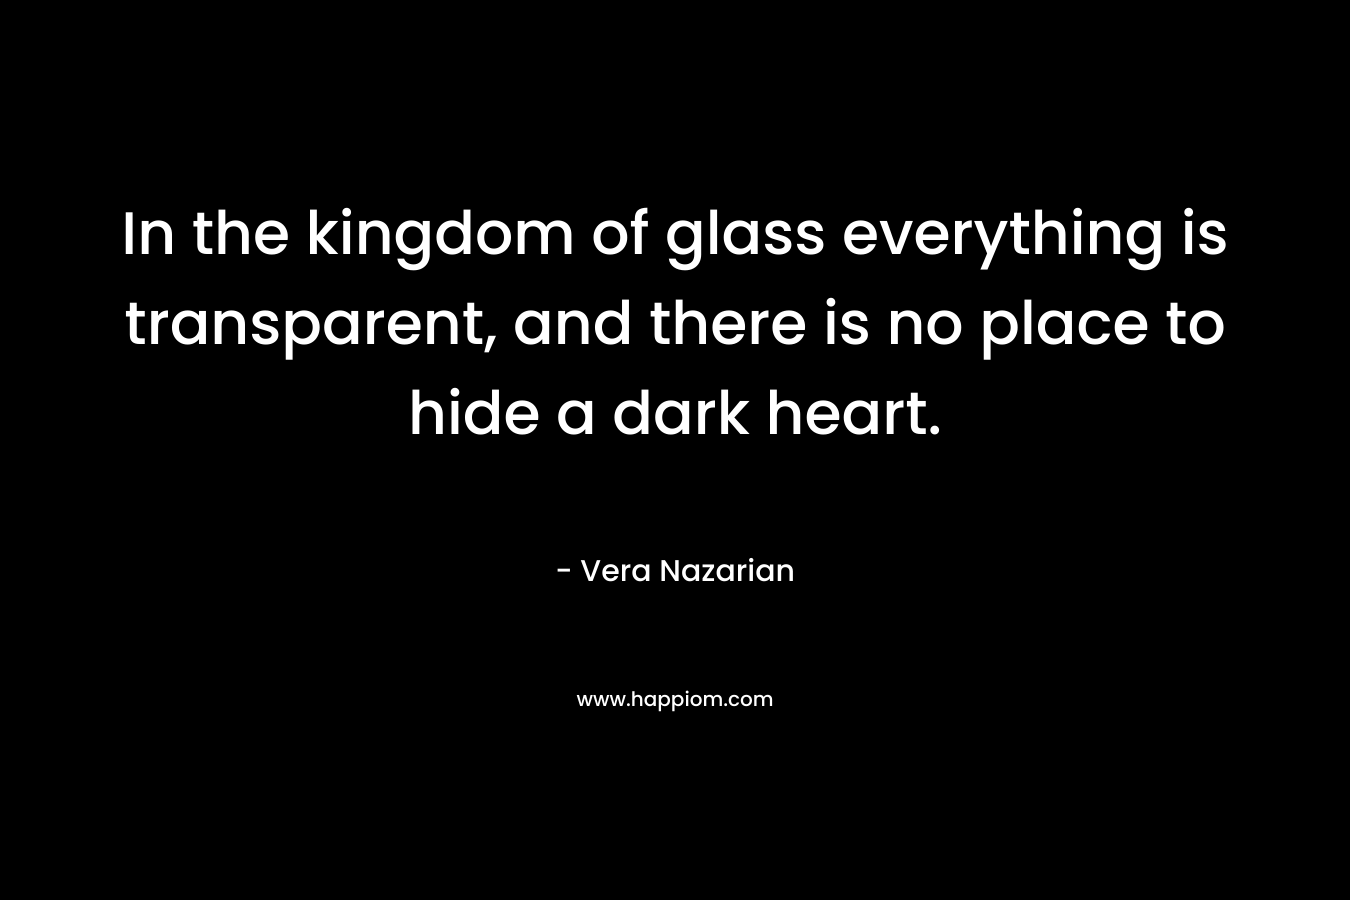 In the kingdom of glass everything is transparent, and there is no place to hide a dark heart.